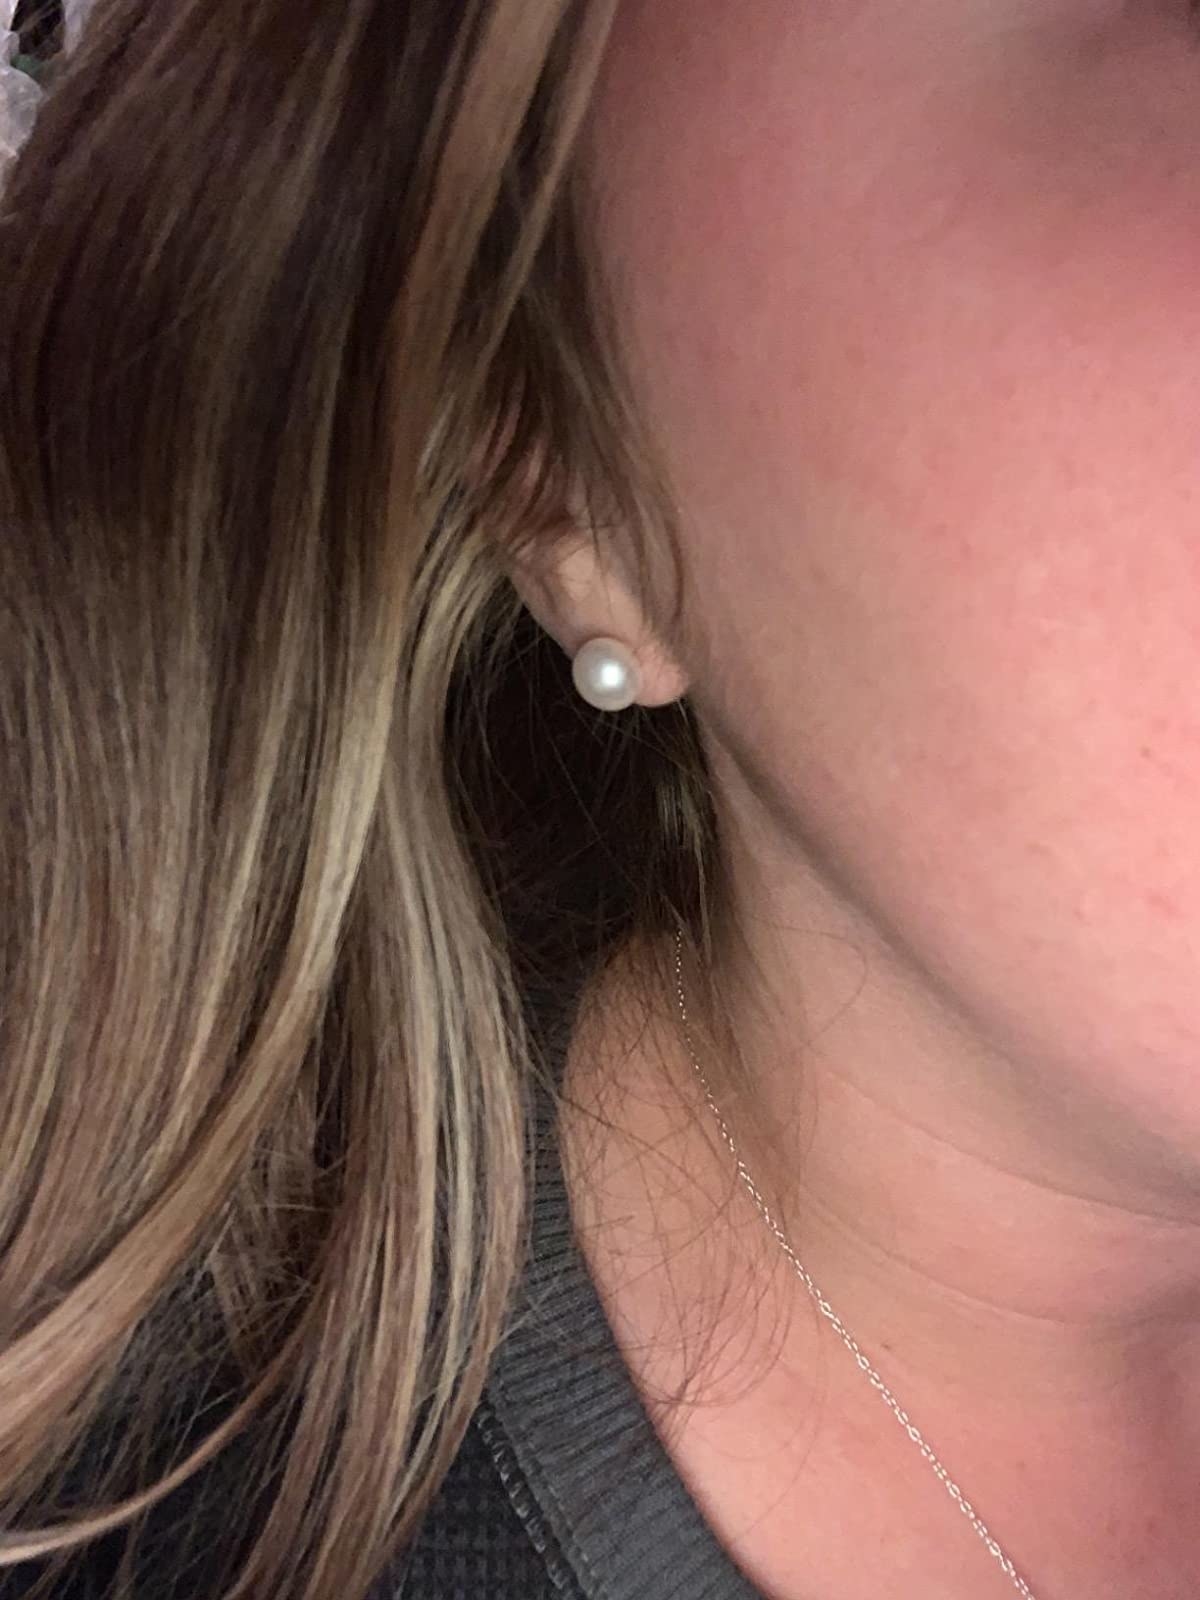 Amazon reviewer wearing Pavoi pearl stud earring